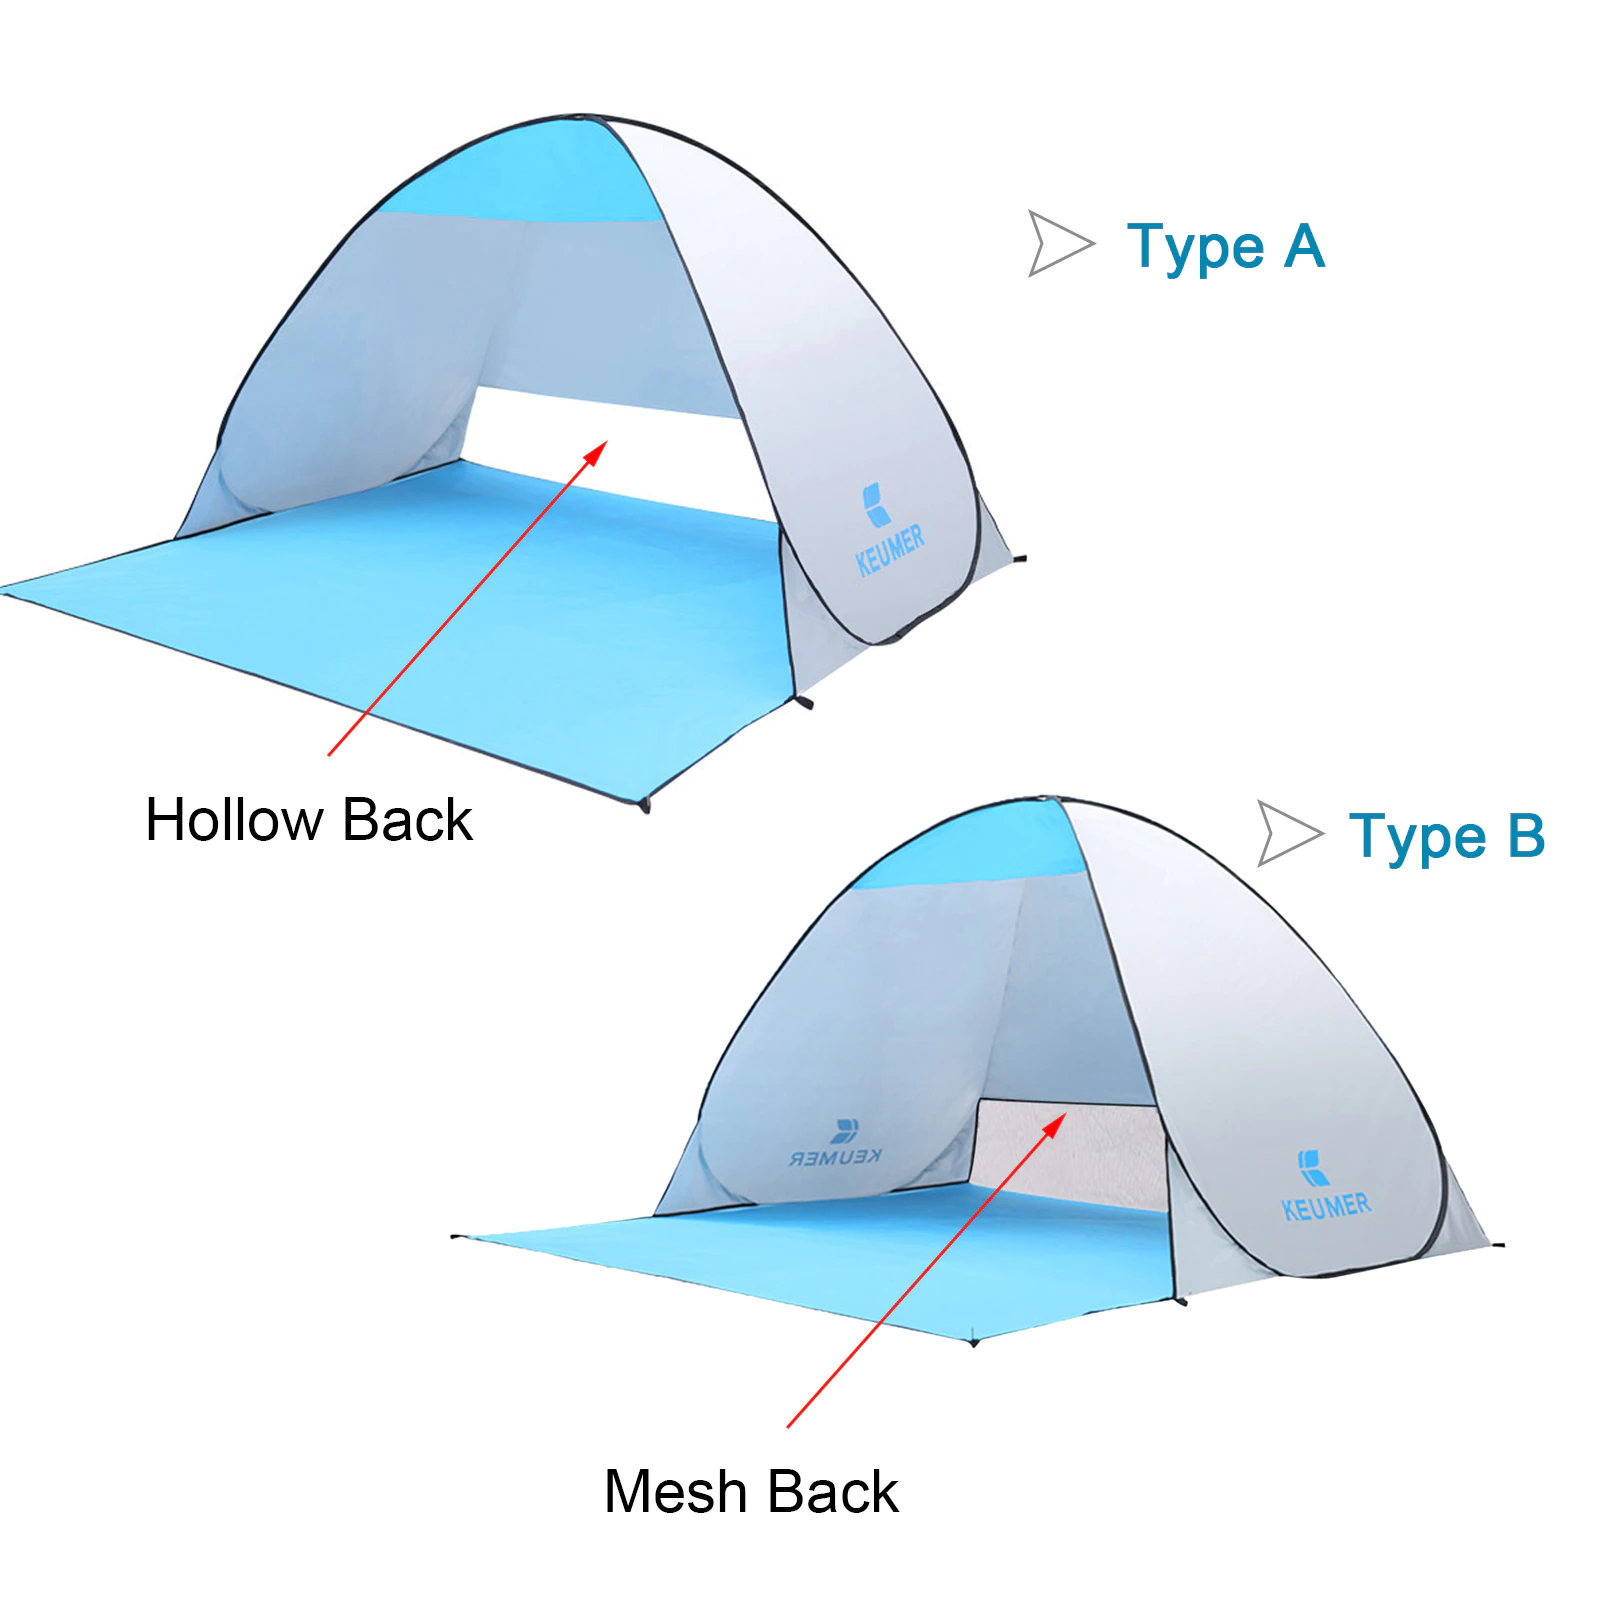 Cheap Goat Tents 70.9x59x43.3 Inch Automatic Instant Pop up Beach Tent Anti UV Sun Shelter Cabana for Camping Fishing Hiking Picnic   